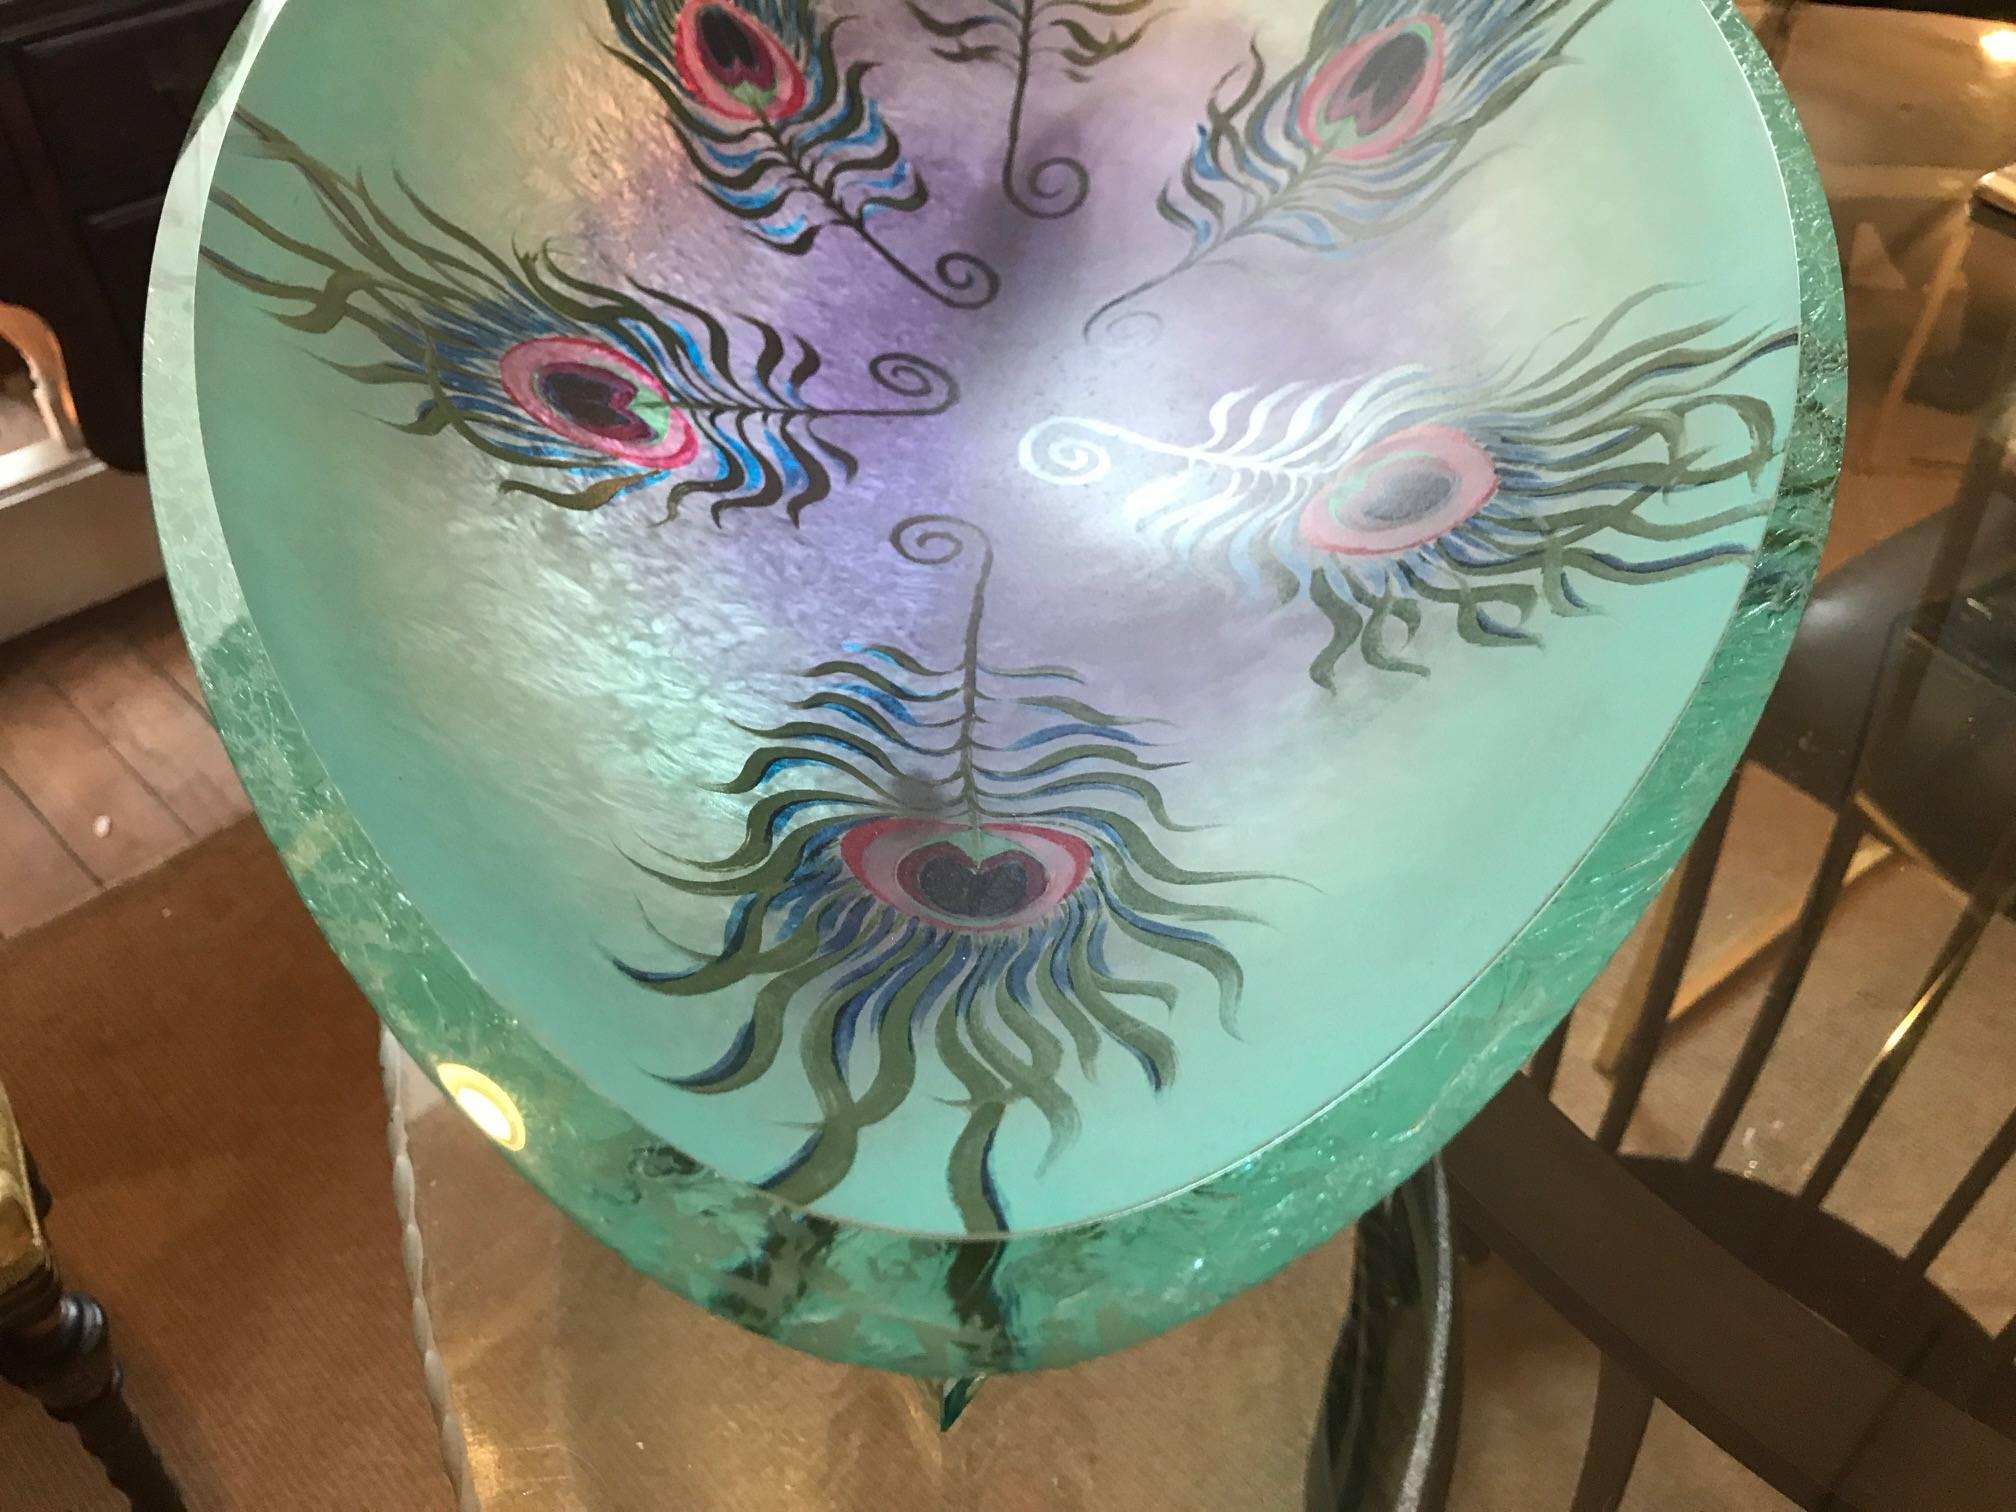 Large art glass peacock sculptural center bowl hand-painted and fired. Oval shape is higher on one side than the other, 8 inches on one side, 10 inches on the other. The bowl is attached to the base by amethyst sculpted glass arms with a diamond